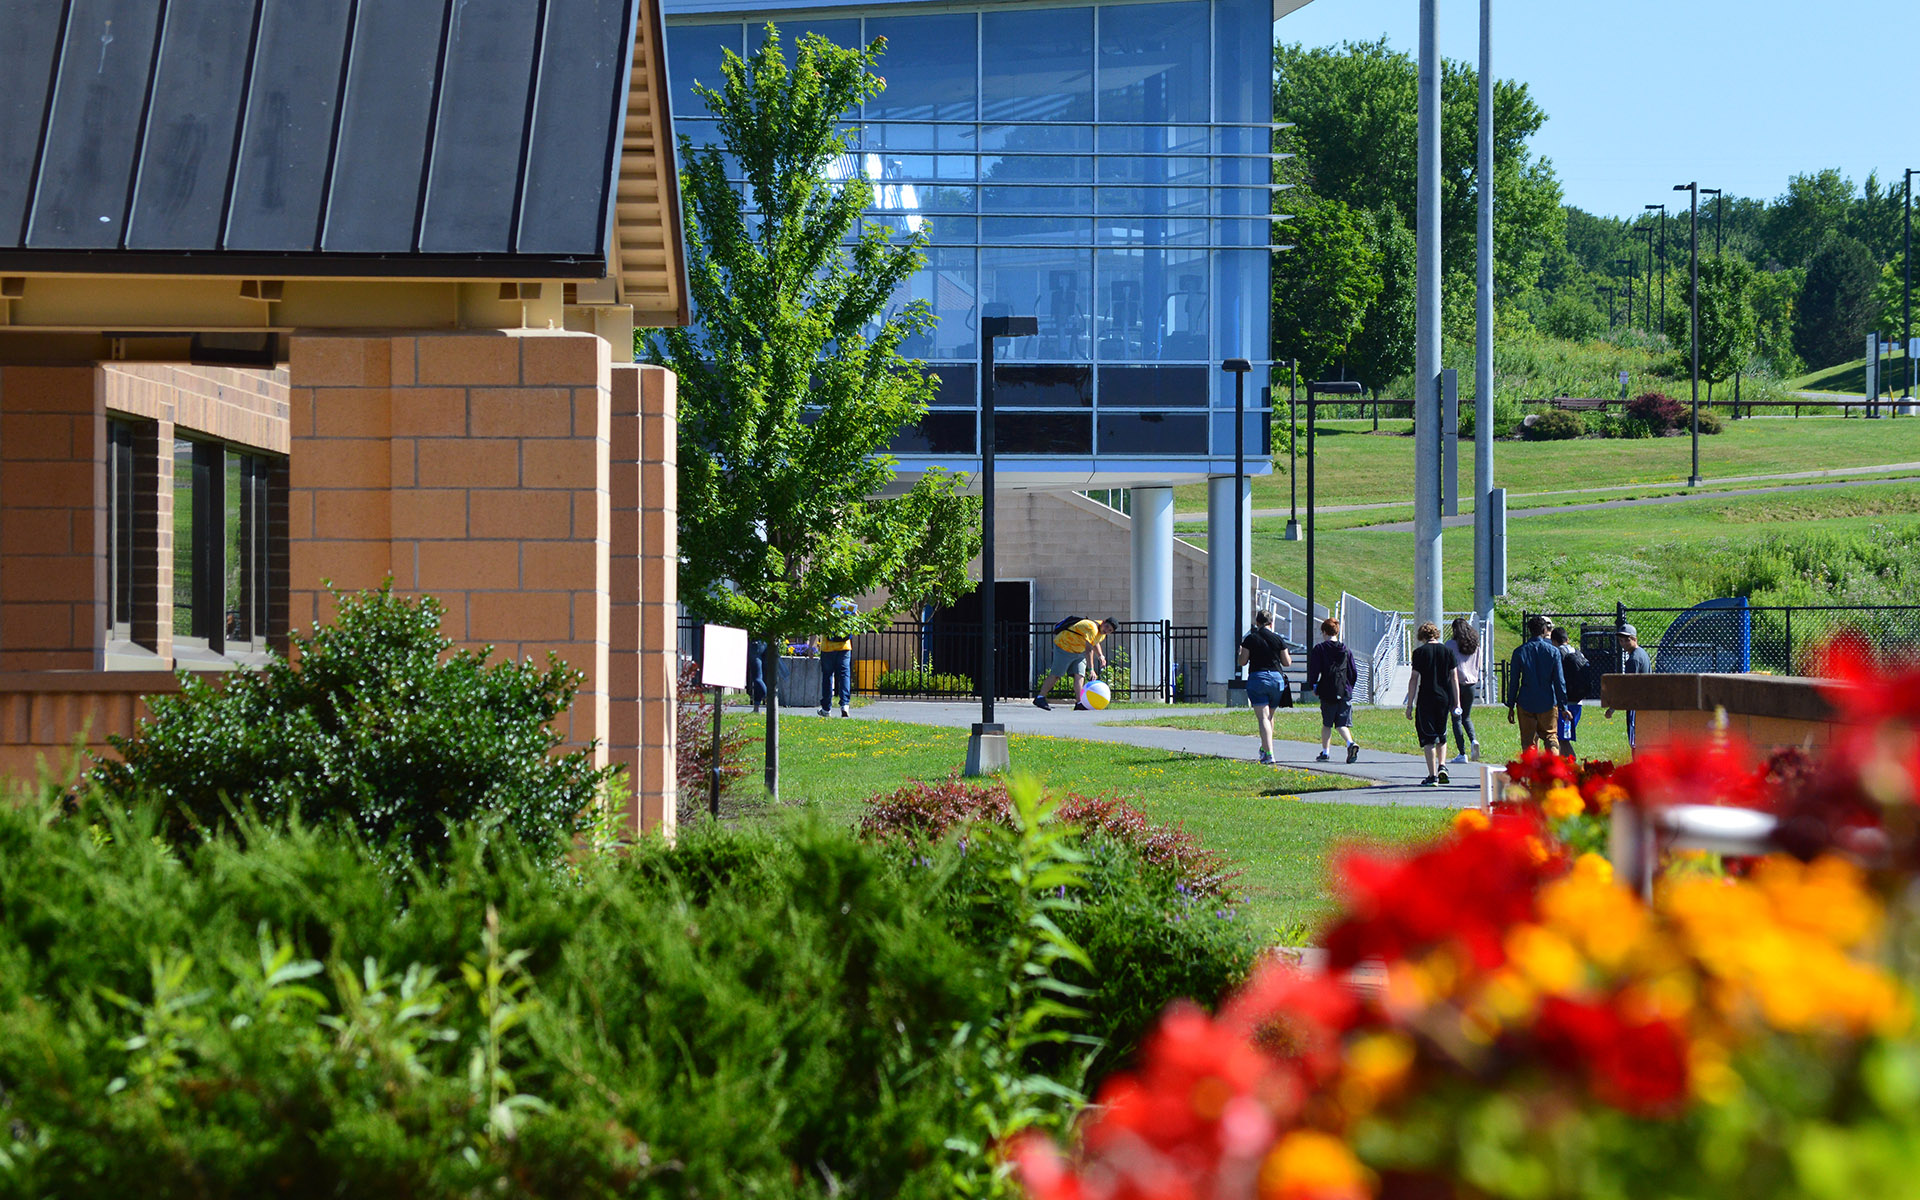 Flowers in front of the Wildcat Field House on the Utica campus